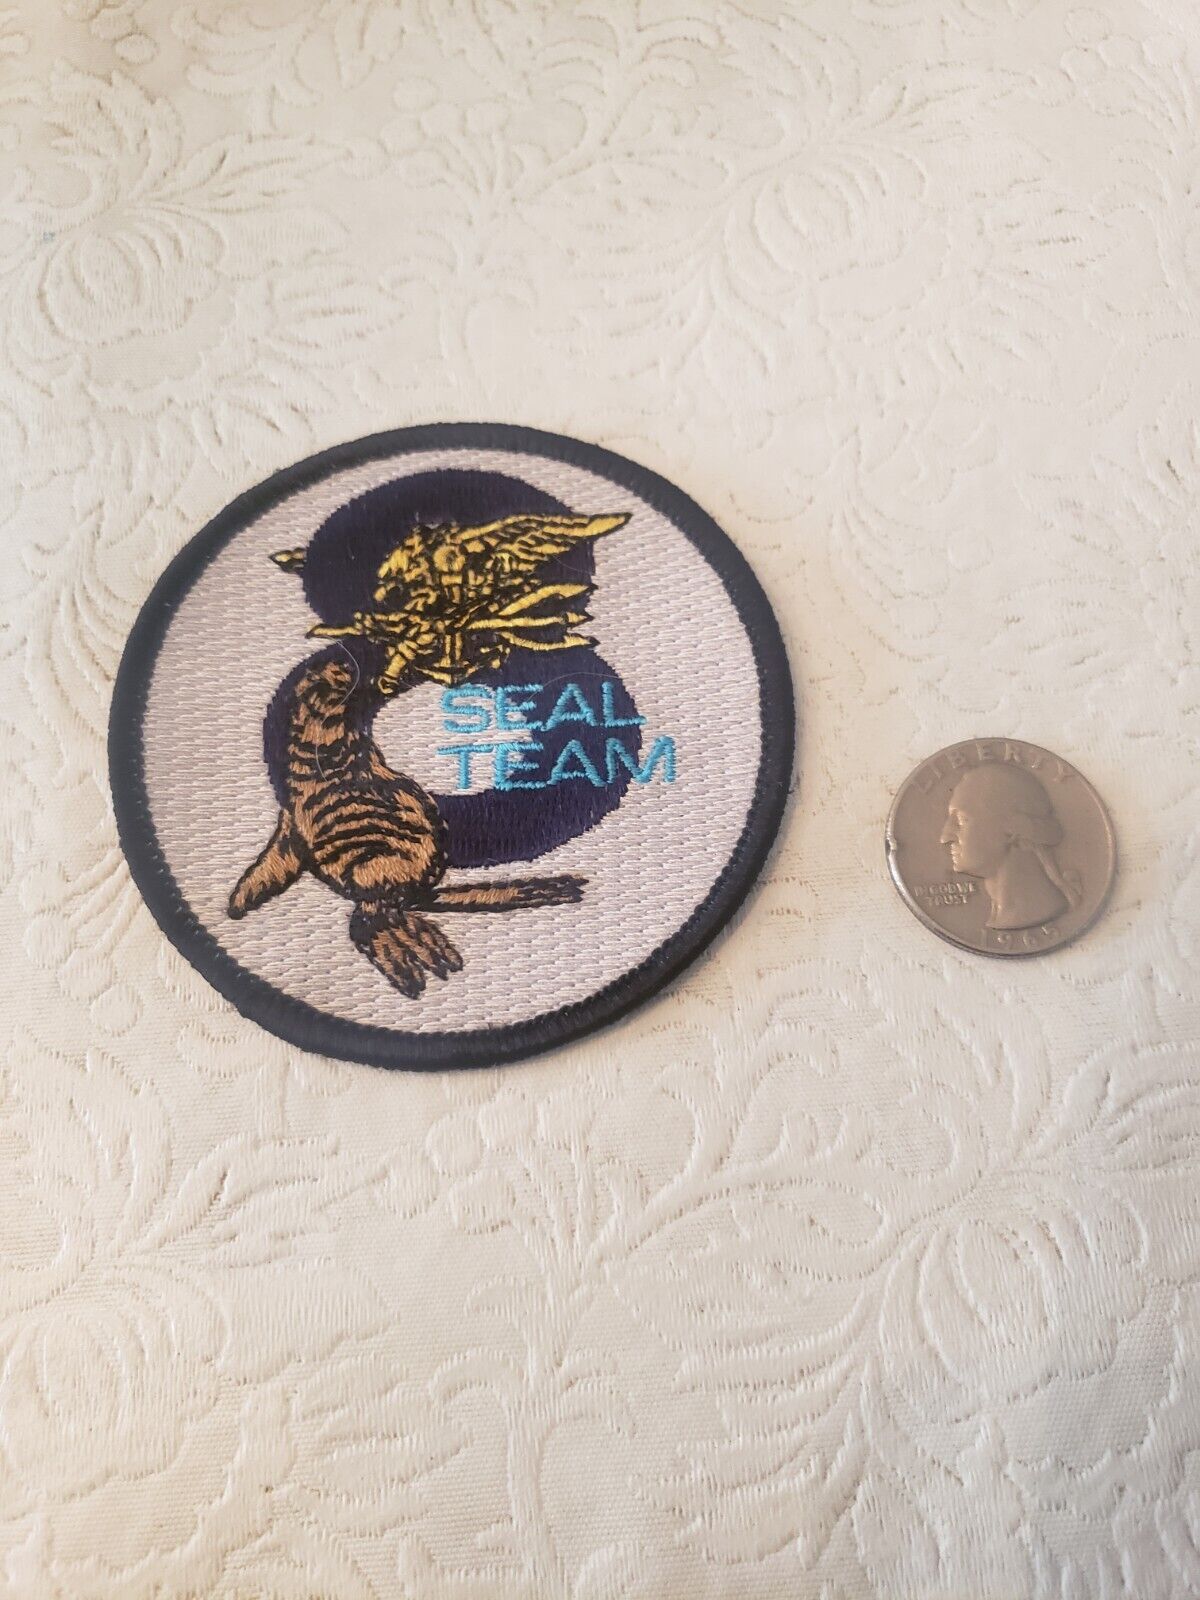 VINTAGE 1990s US NAVY SEAL TEAM EIGHT PATCH, MINT.